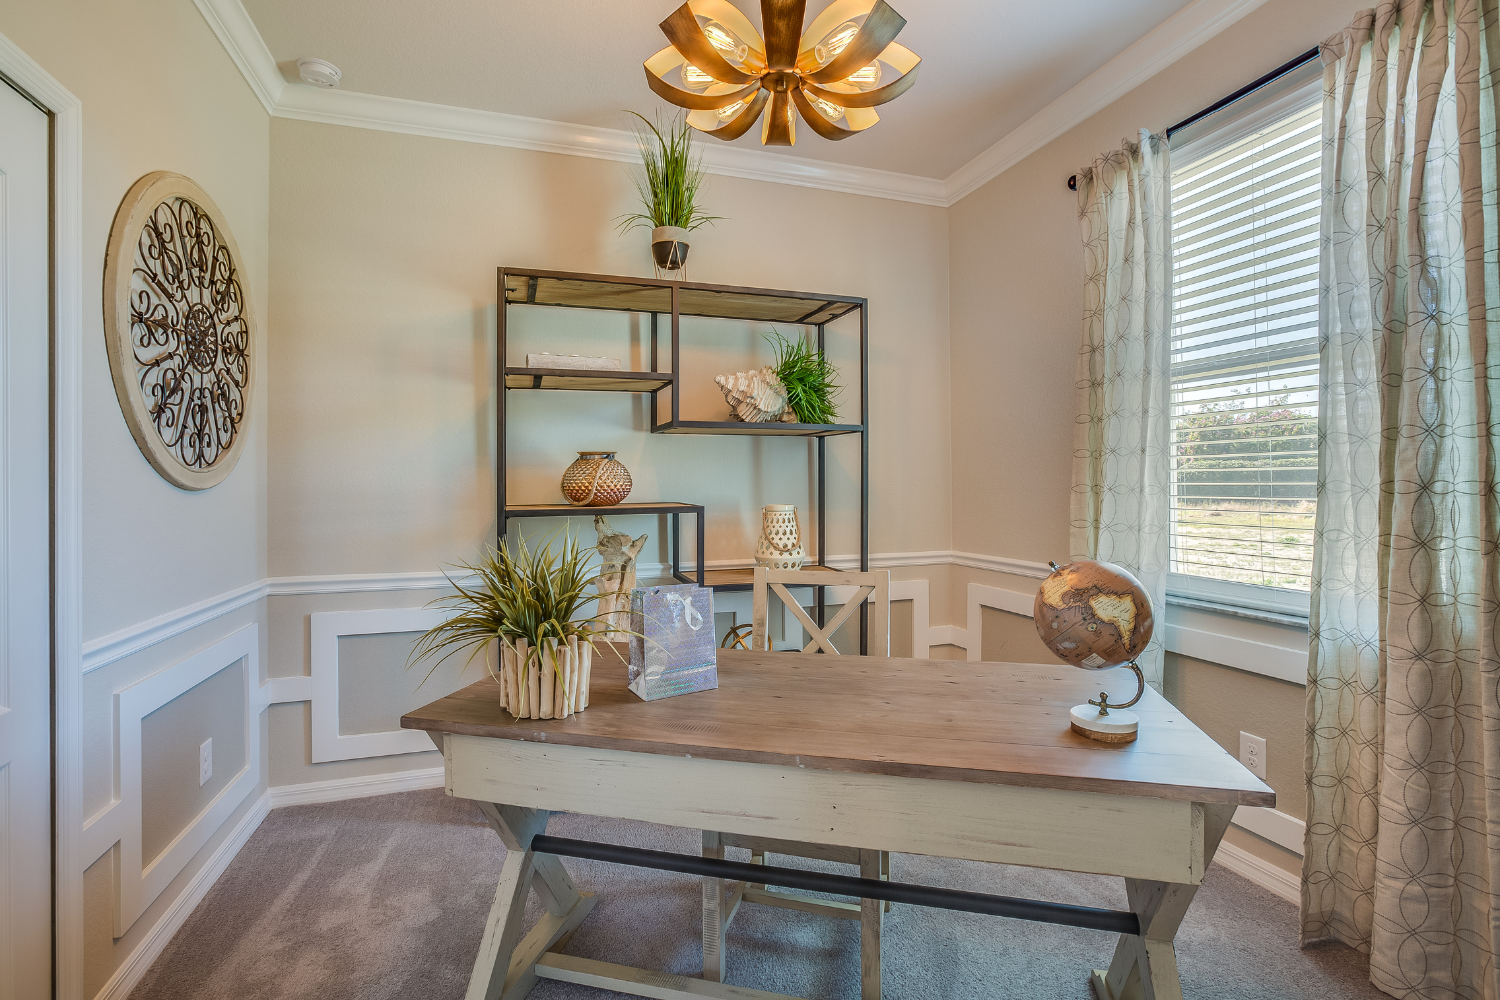 pamela-sandall-design-santa-monica-ca-home-staging-should-you-stage-your-home-before-listing-home-office-desk-work-from-home-traditional